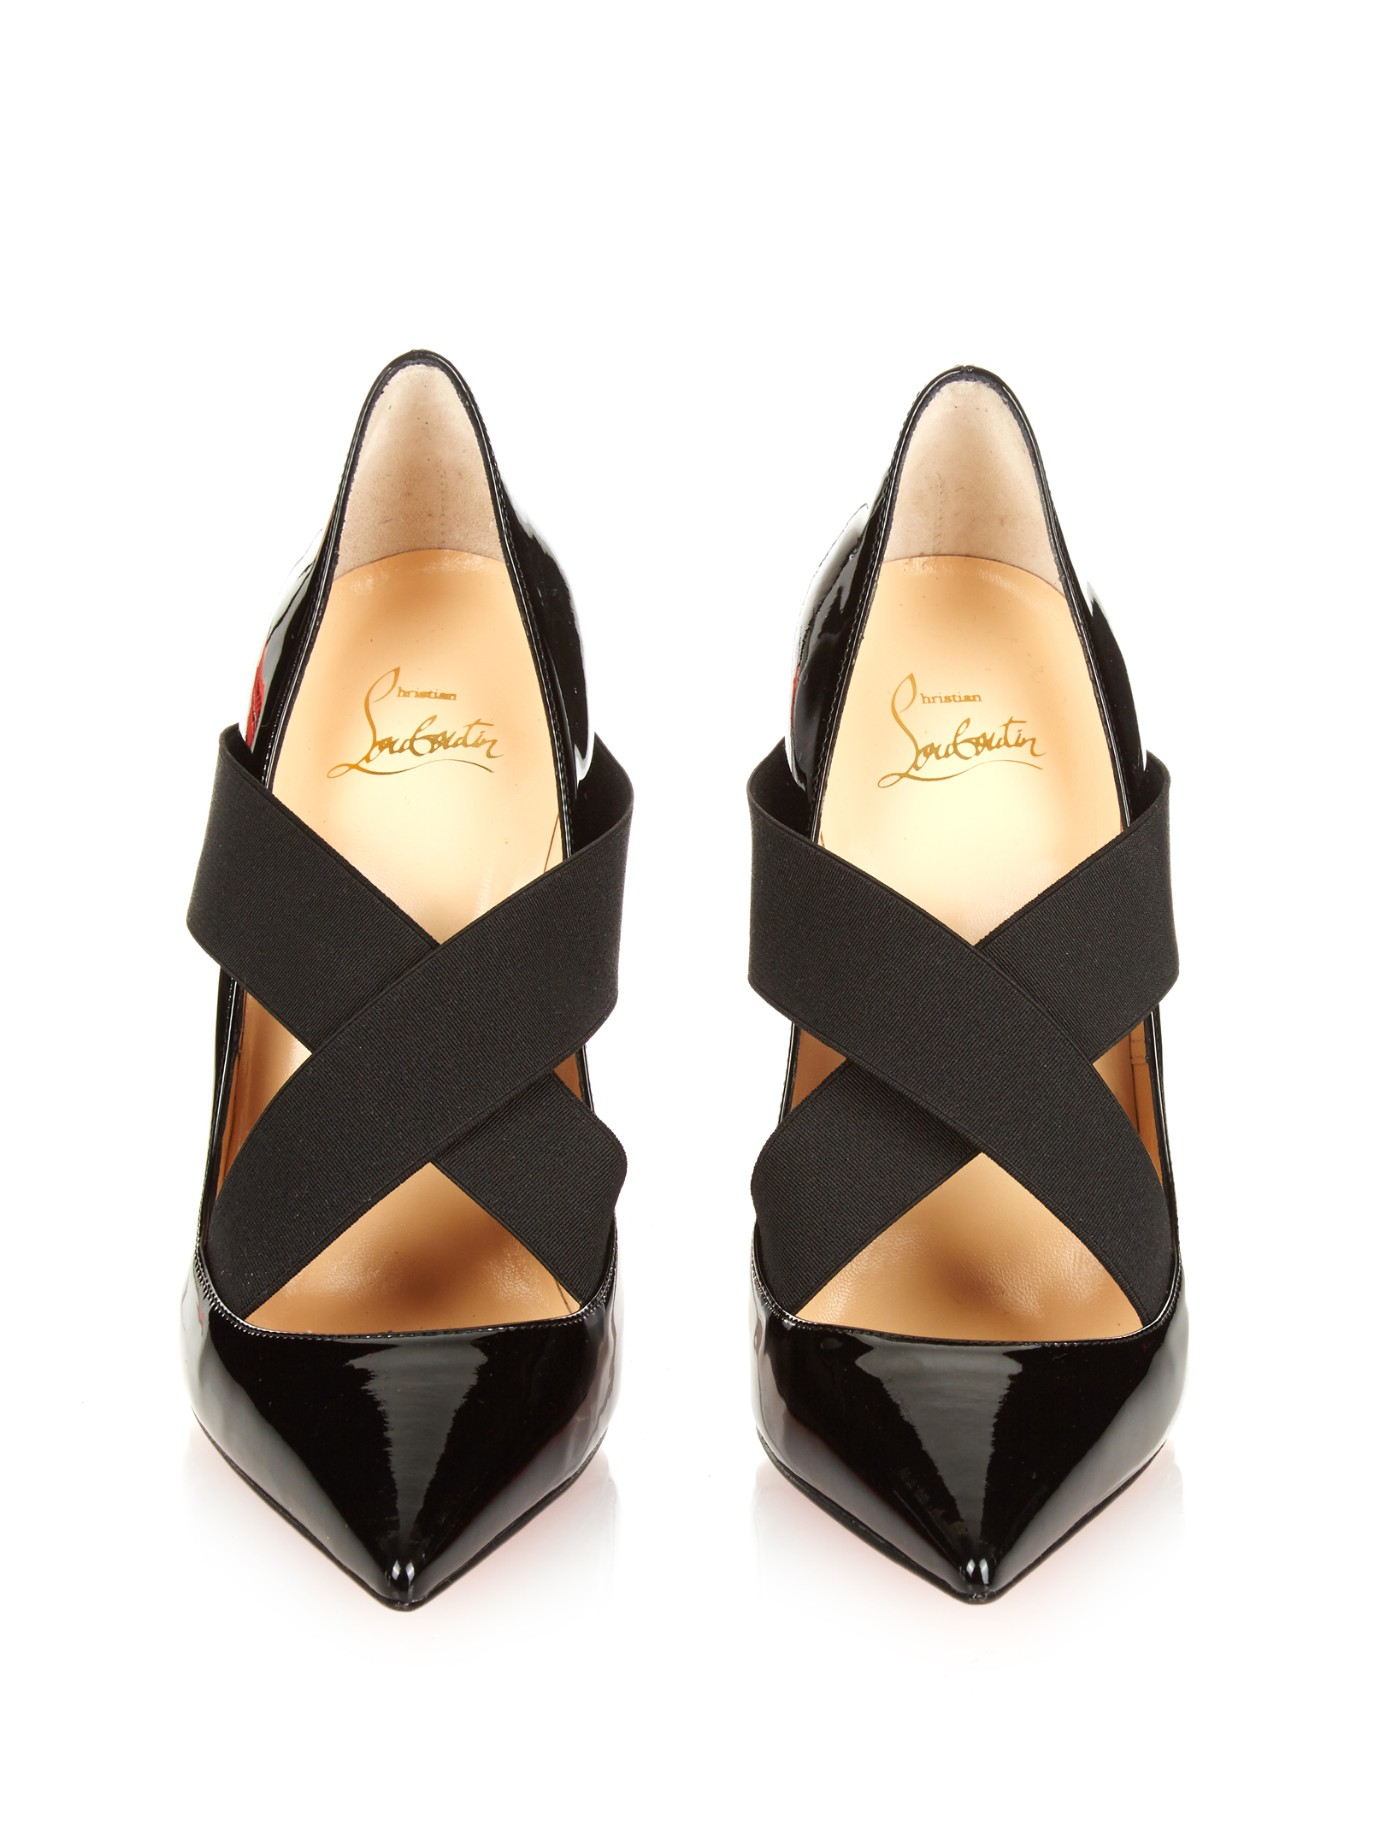 Christian Louboutin Sharpstagram Crossover Patent Leather Pumps in 